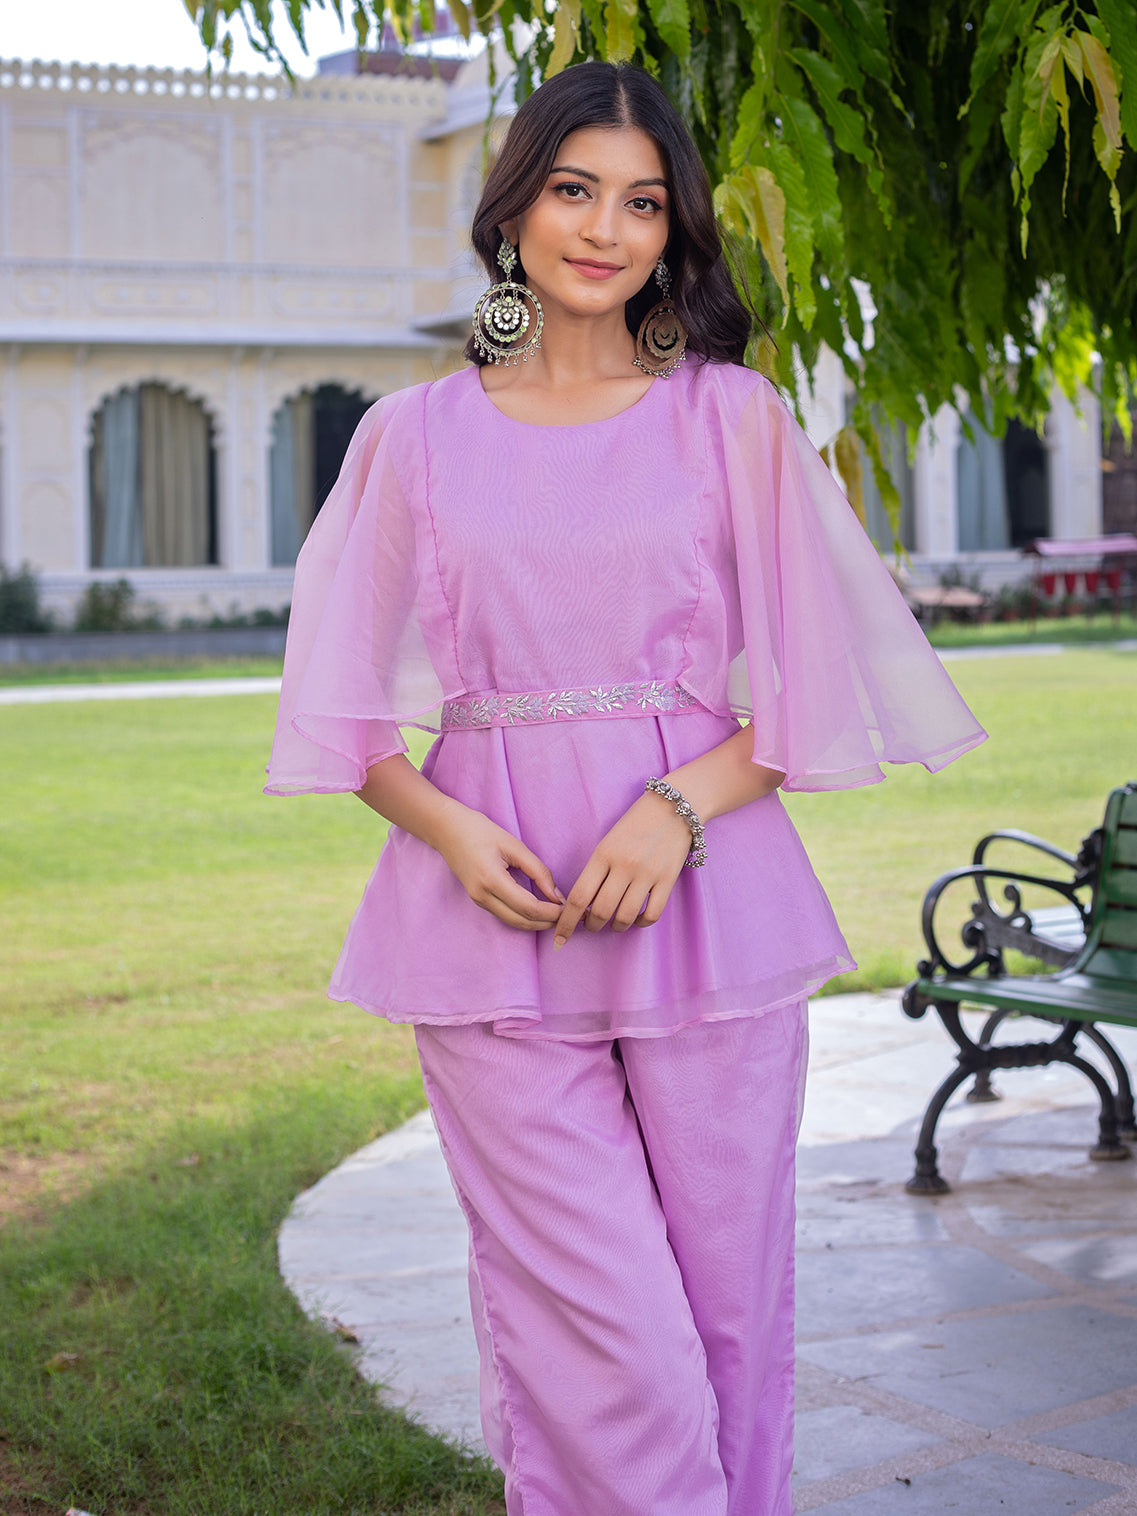 step-into-elegance-with-our-lavender-peplum-top-paired-with-a-silver-embroidered-belt-and-pants-a-perfect-set-of-two-for-a-stylish-and-graceful-look